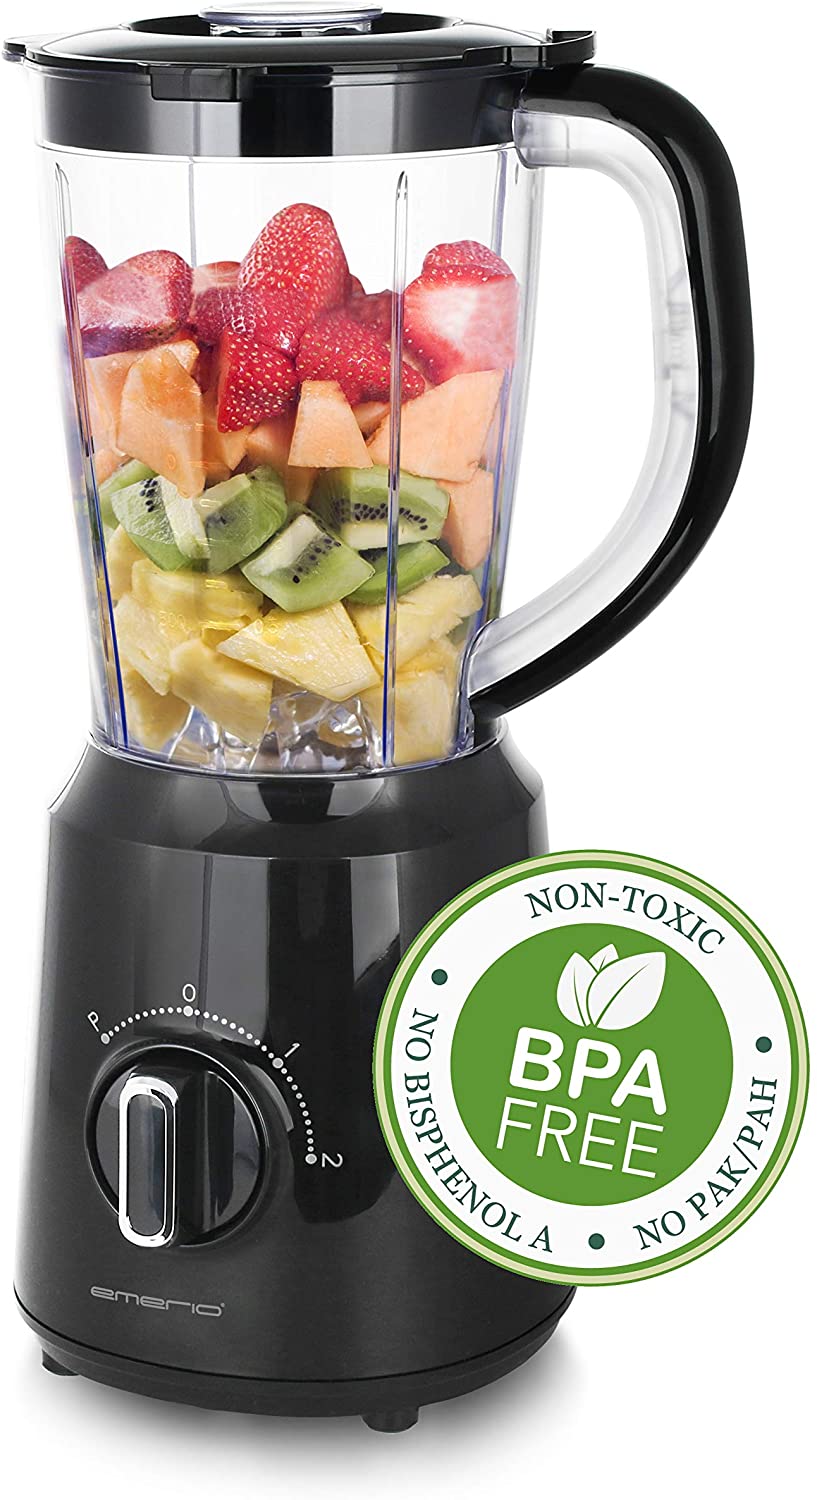 Emerio Blender, BPA-Free, Crush Ice Function, 1.5 L Container, 2 Speeds + Pulse Function, Stainless Steel Knife Unit, Safety Switch, Dishwasher-Safe, 500 Watt